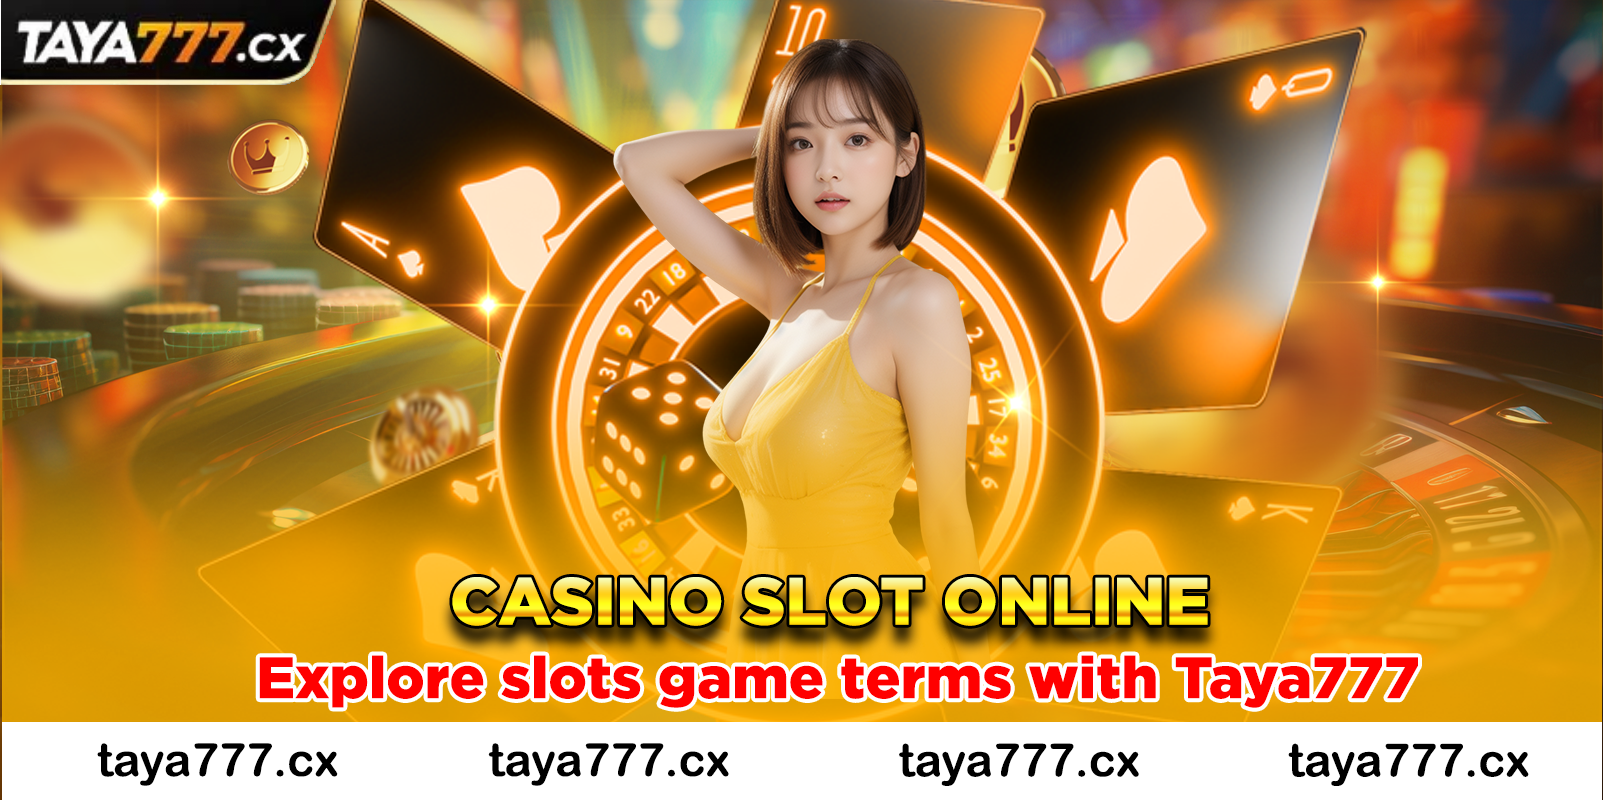 Explore slots game terms with Taya777 - Casino slots online